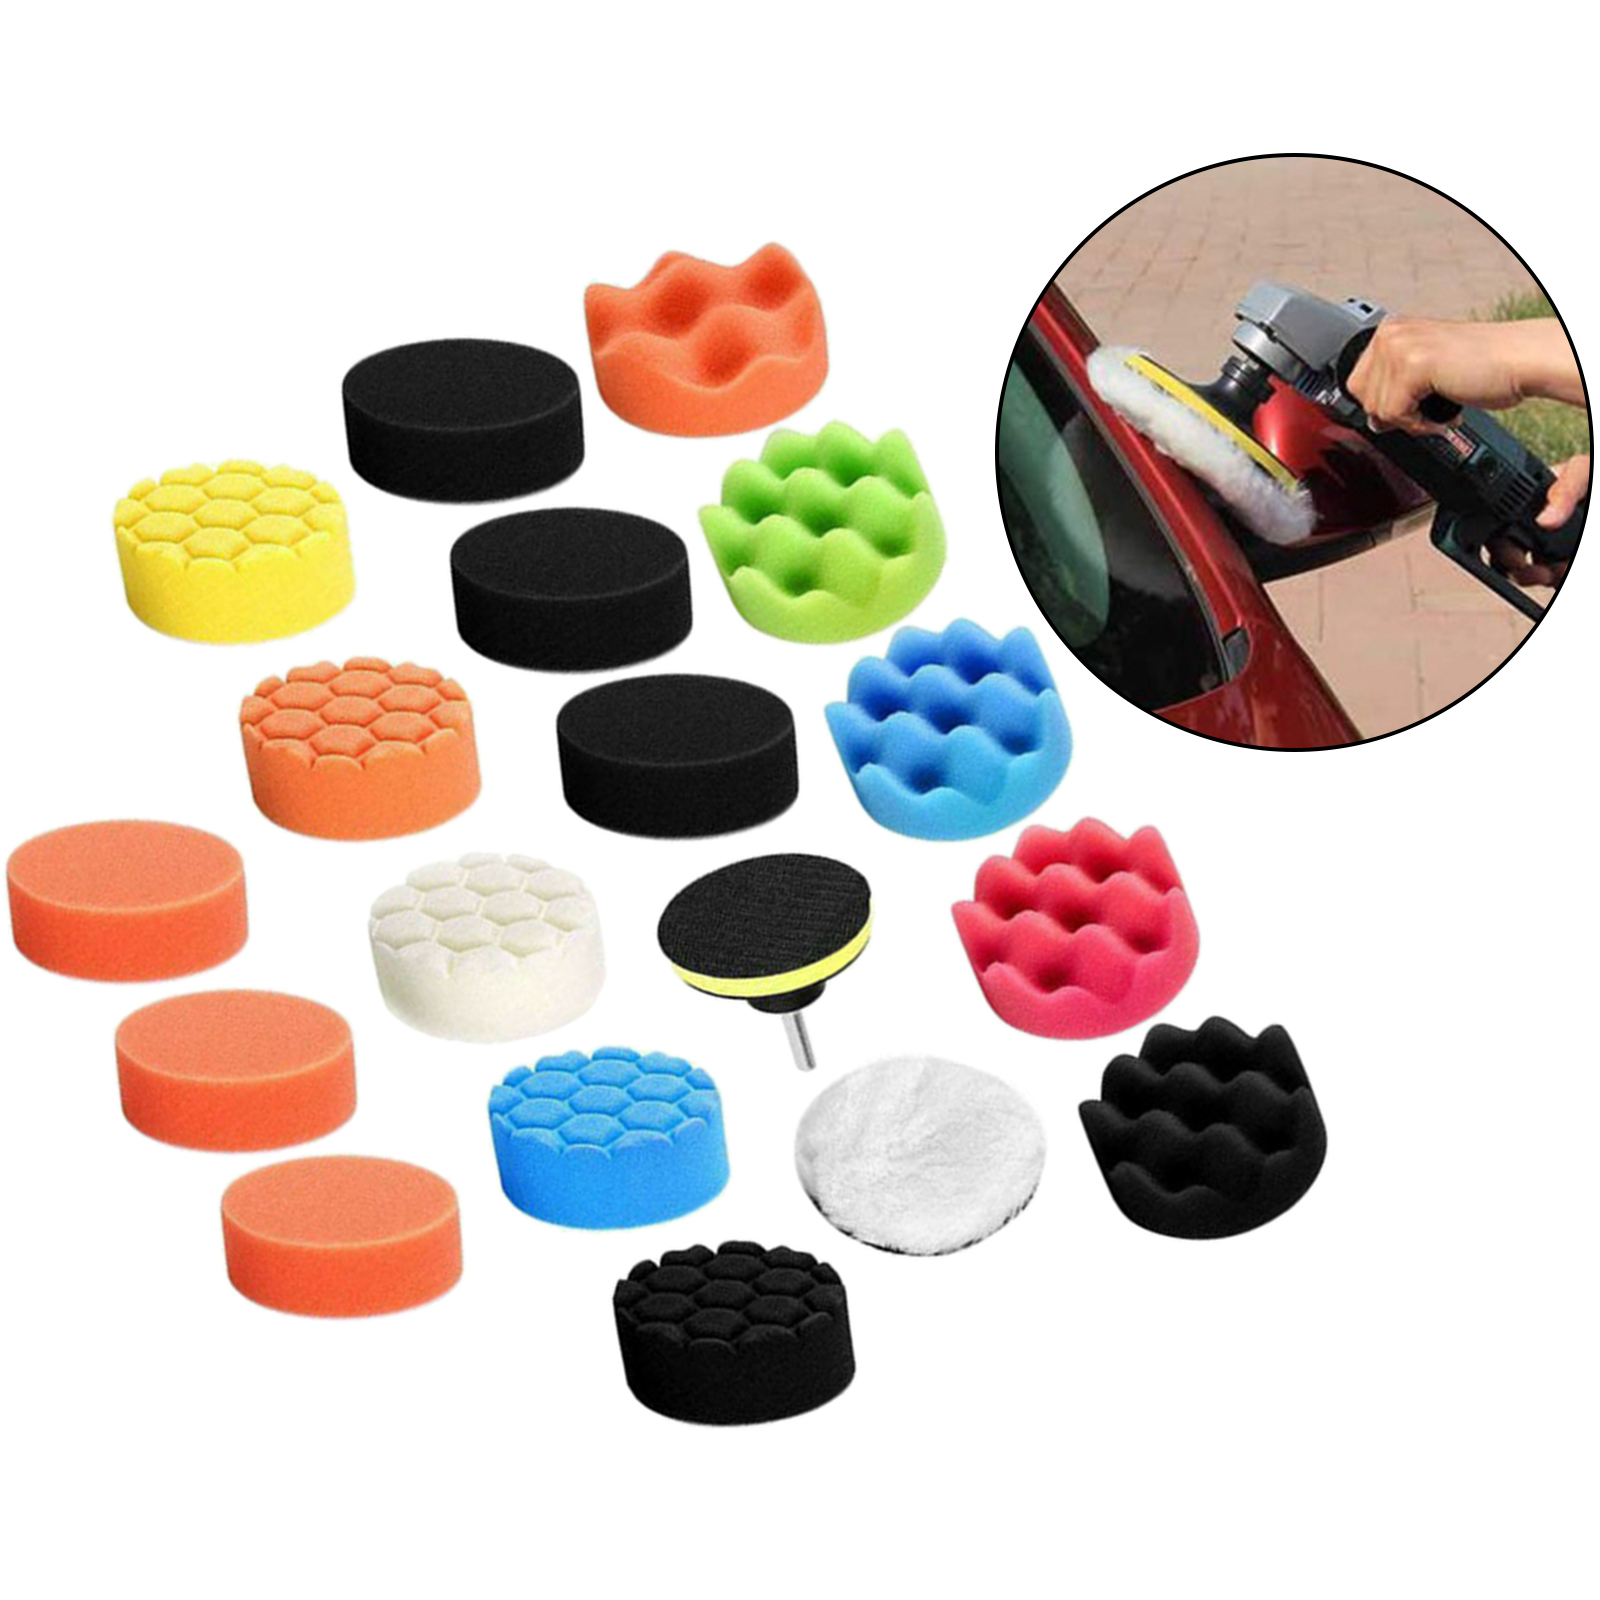 19/22/25pcs Car Polishing Pads Kit 3in with Adapter 2 in 1 for Polishing B